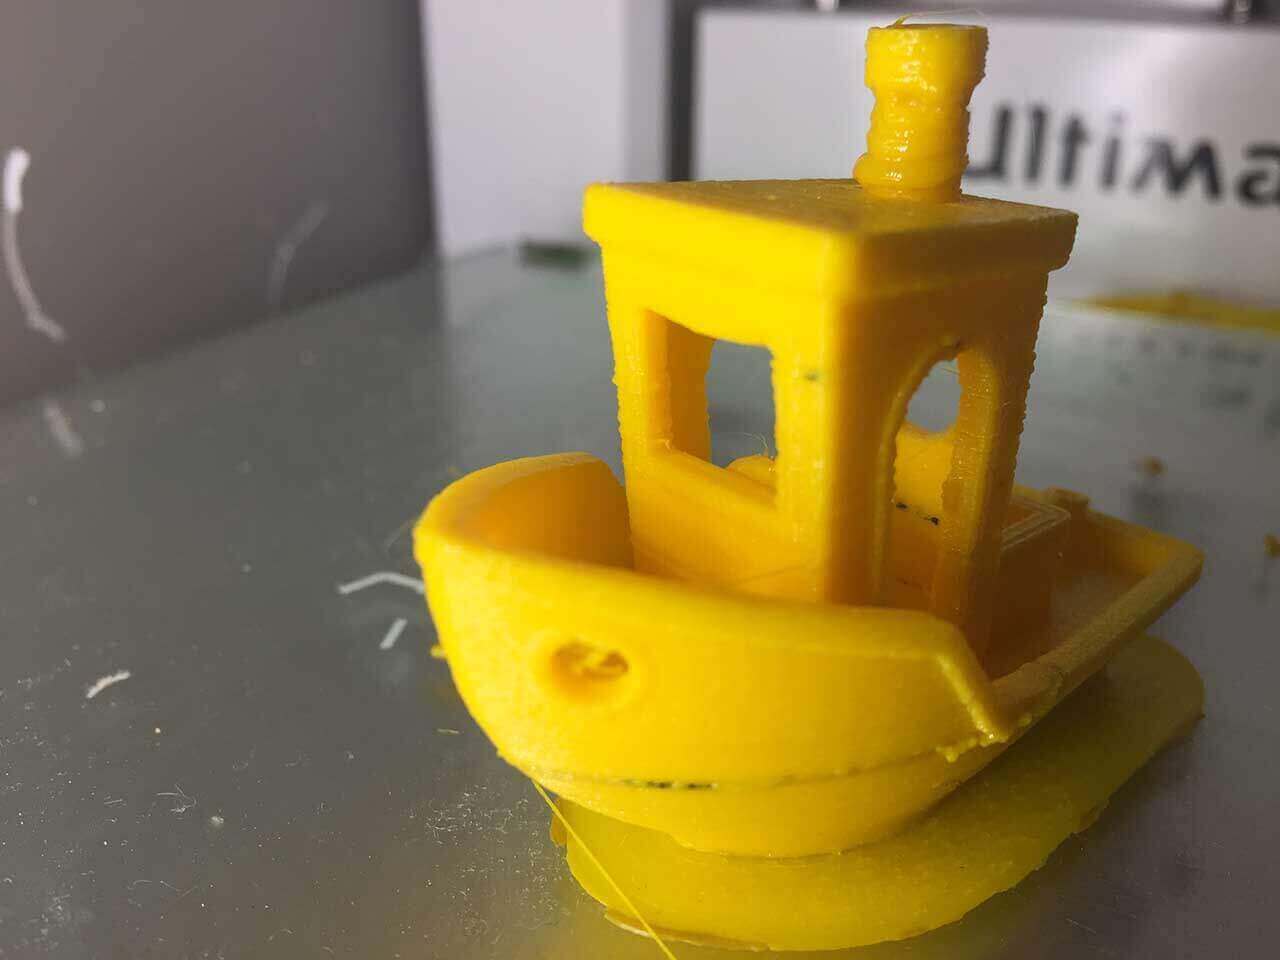 Limitations and Common Issues with 3D Printing